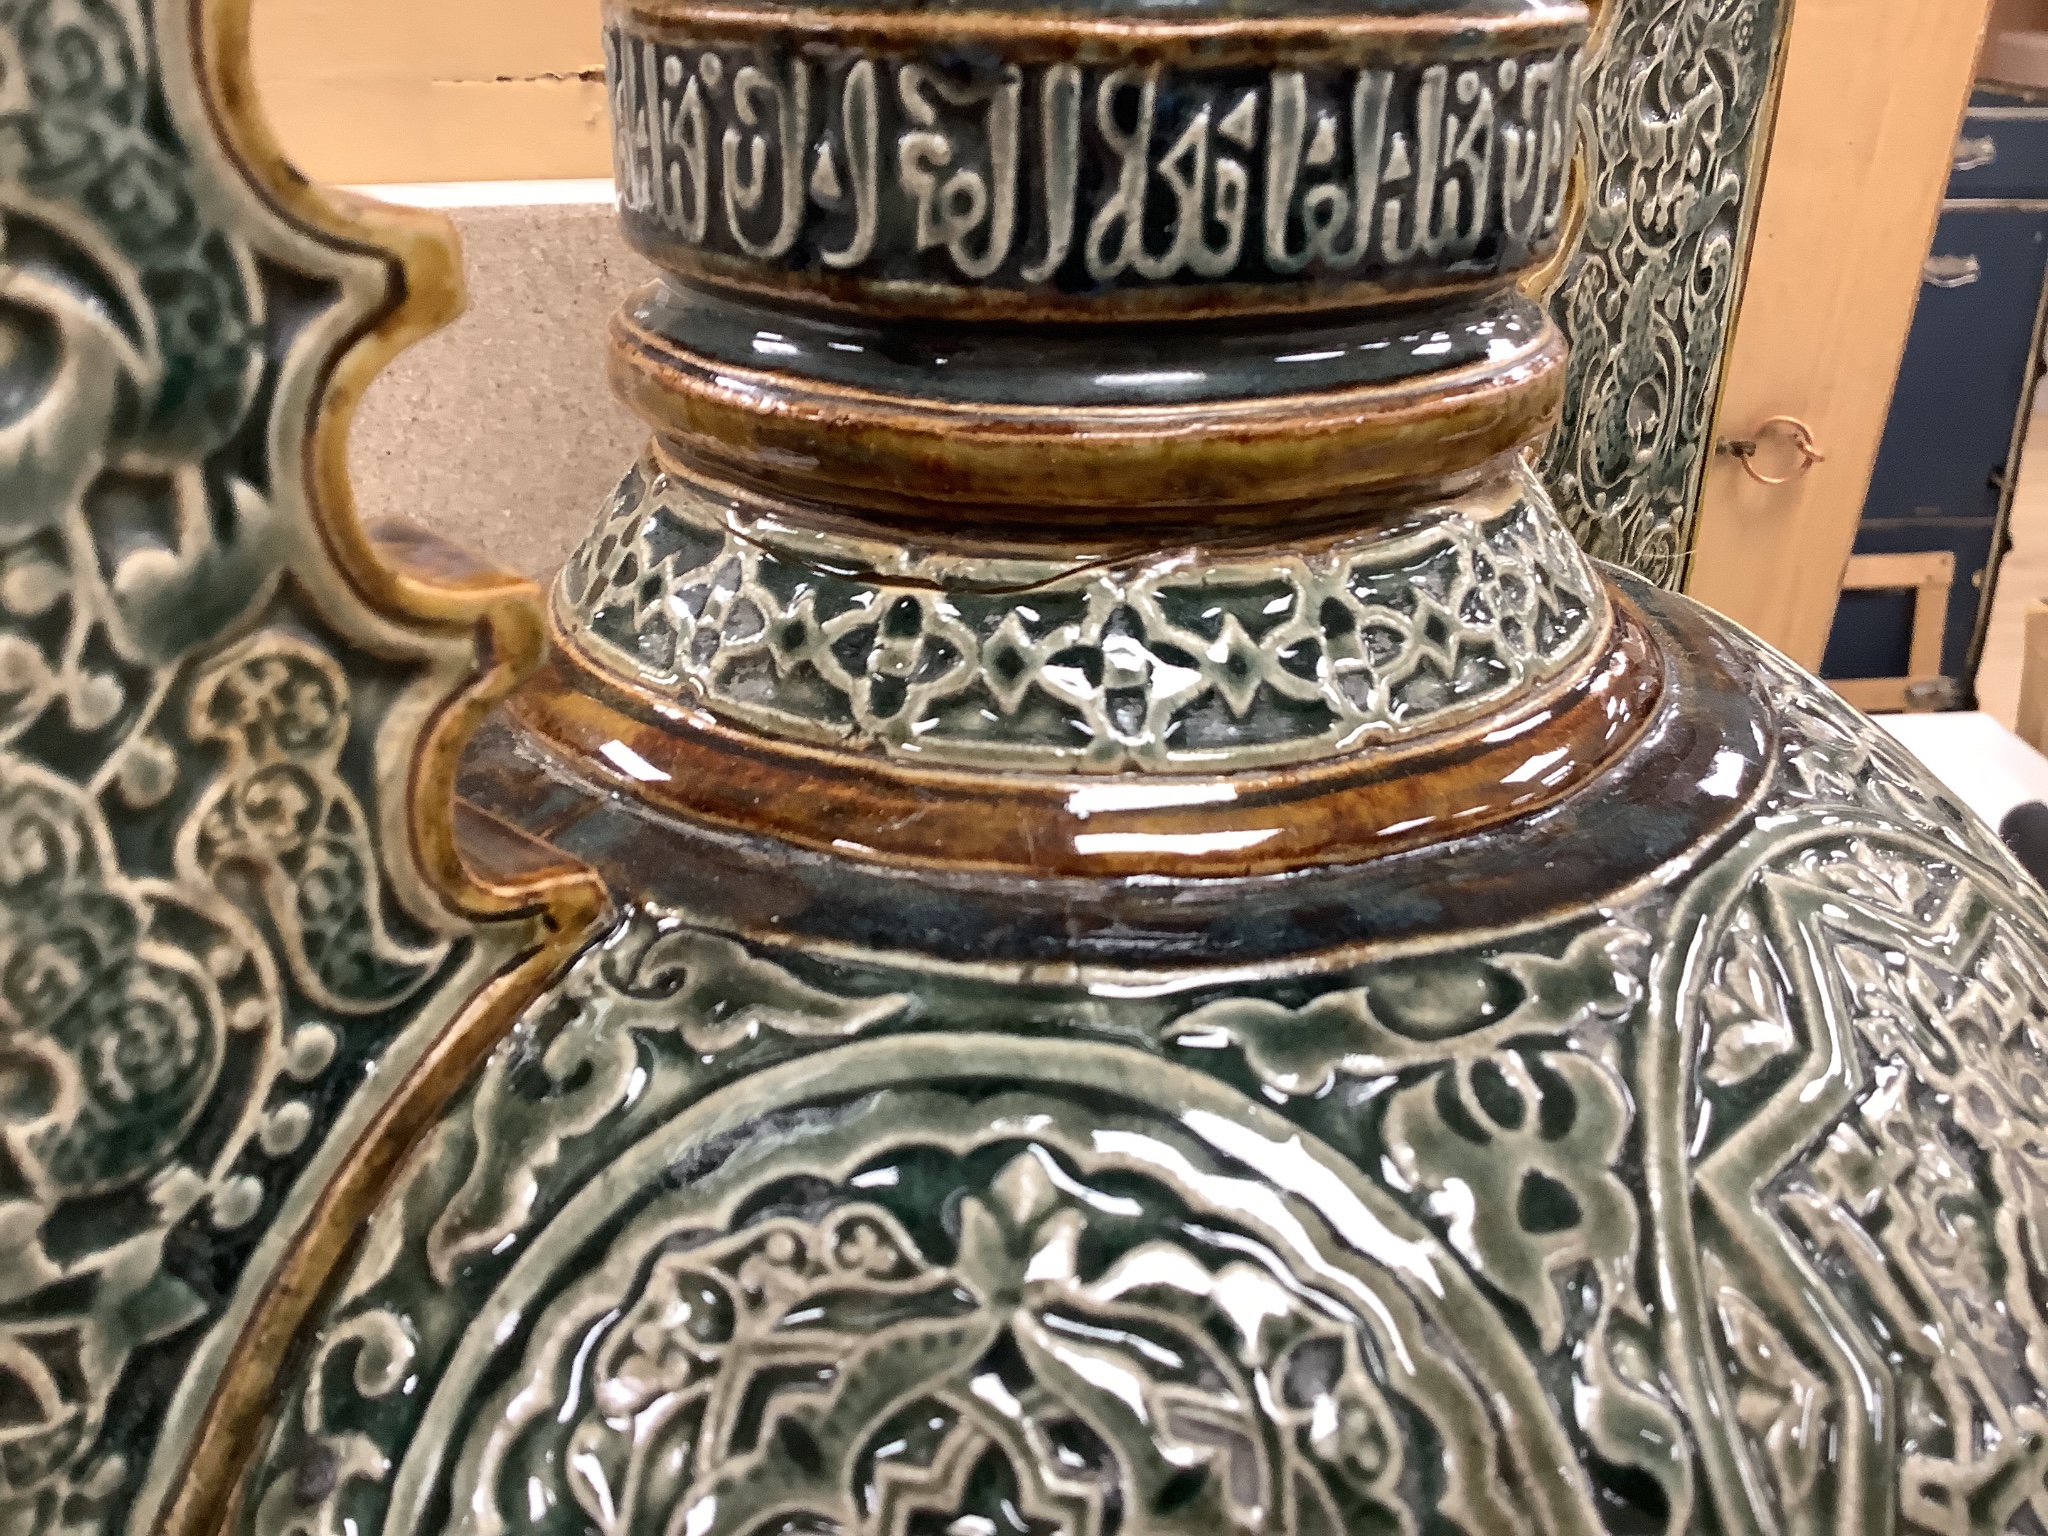 A large Doulton Lambeth Islamic inspired two handled glazed stoneware vase, dated 1880, 47cm, repairs